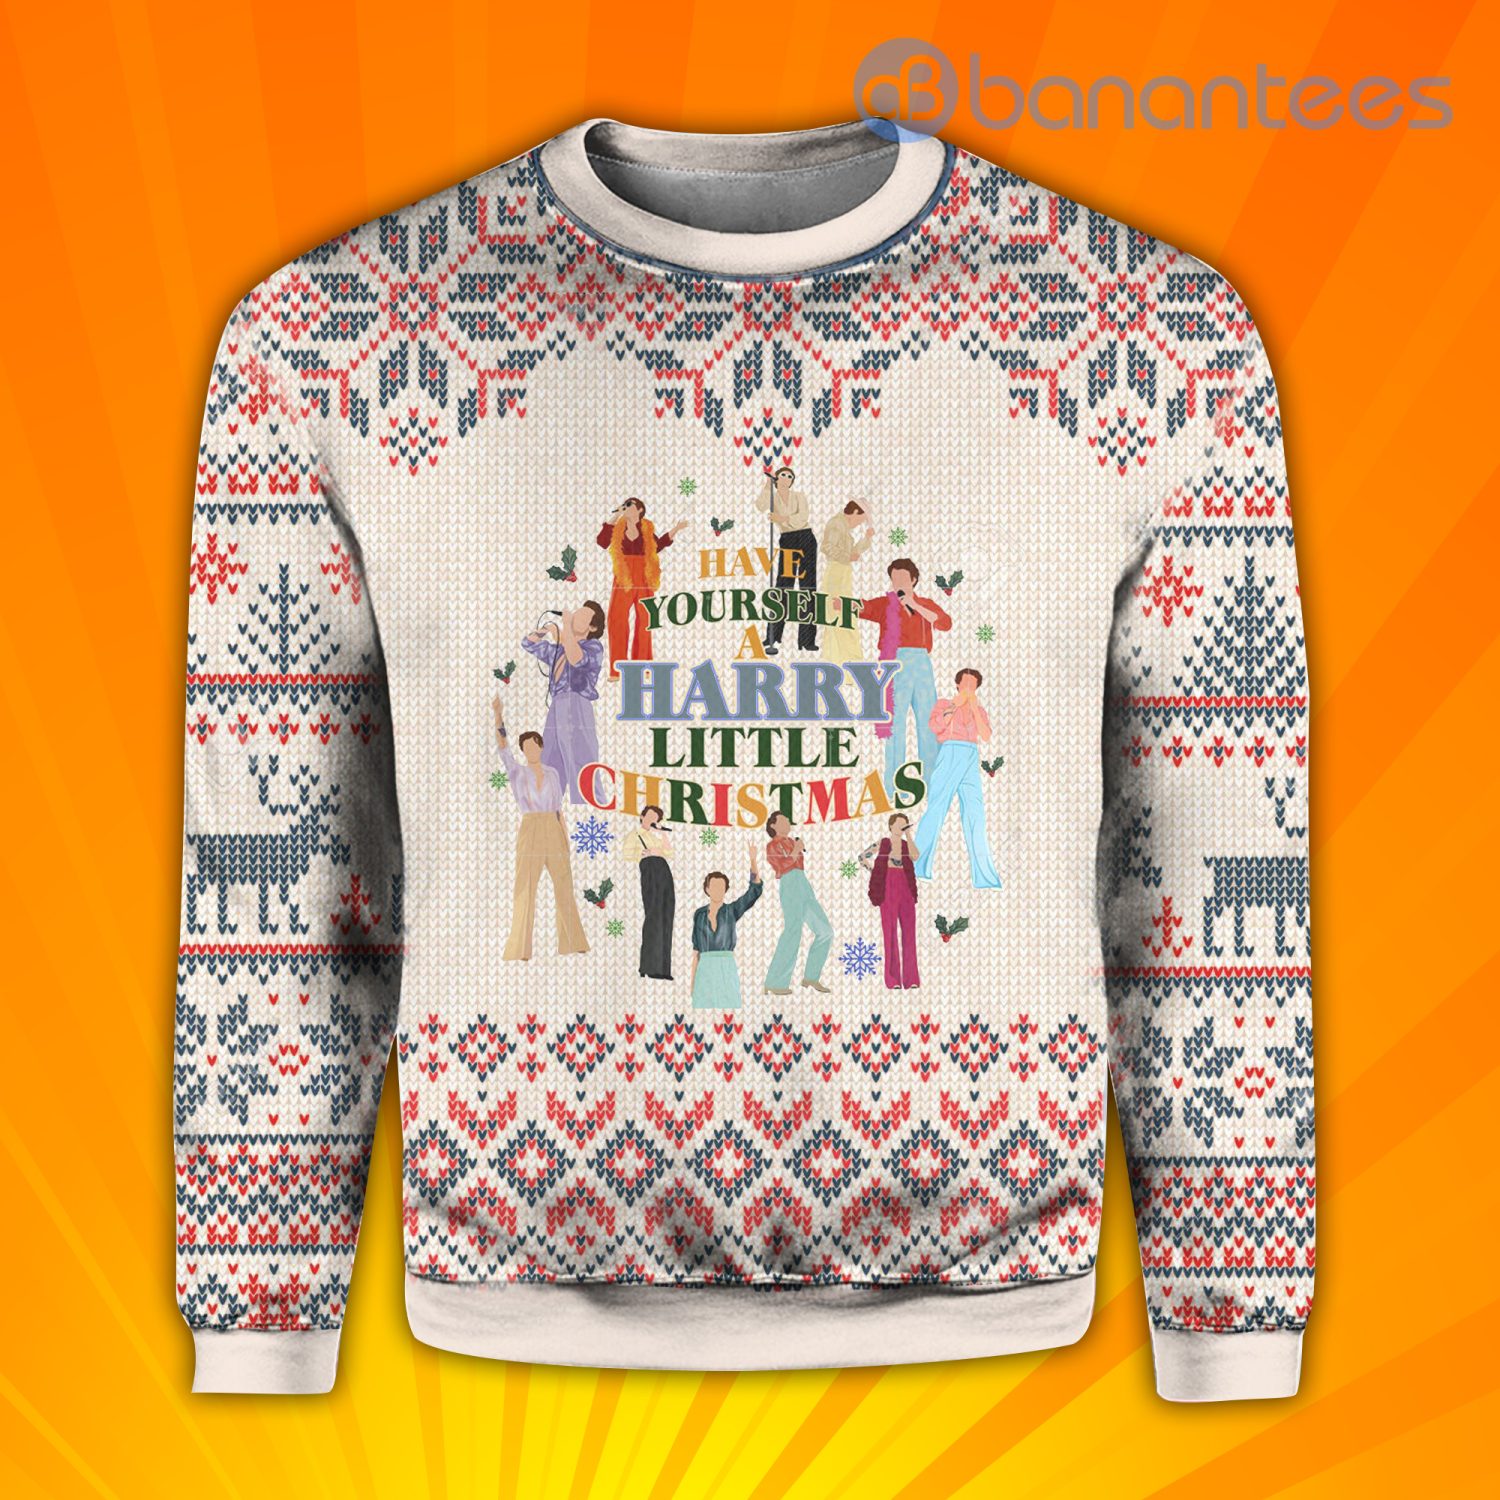 Harry Styles Have Yourselt A Harry Little Christmas Ugly Sweater - Sweater - White